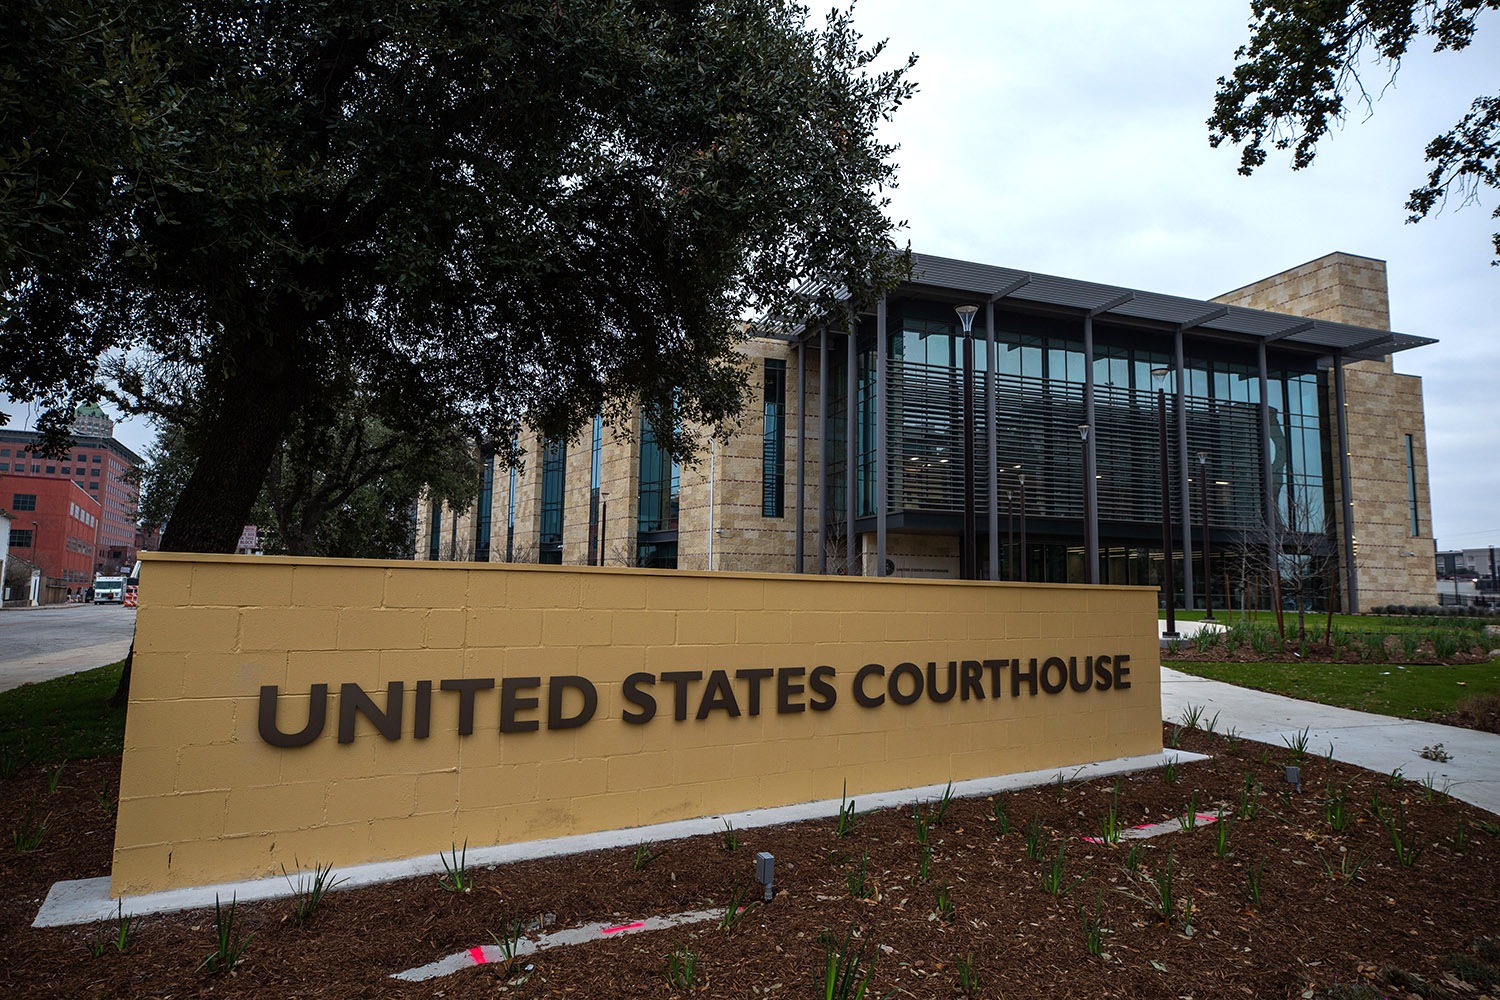 The newly opened Federal Courthouse heard its first trials this week in downtown San Antonio, Texas, on Jan. 26, 2022. The building incorporated elements from the old courthouse among the modern main hall, court rooms and jury-focused areas. Photo by Kaylee Greenlee Beal | Heron contributor